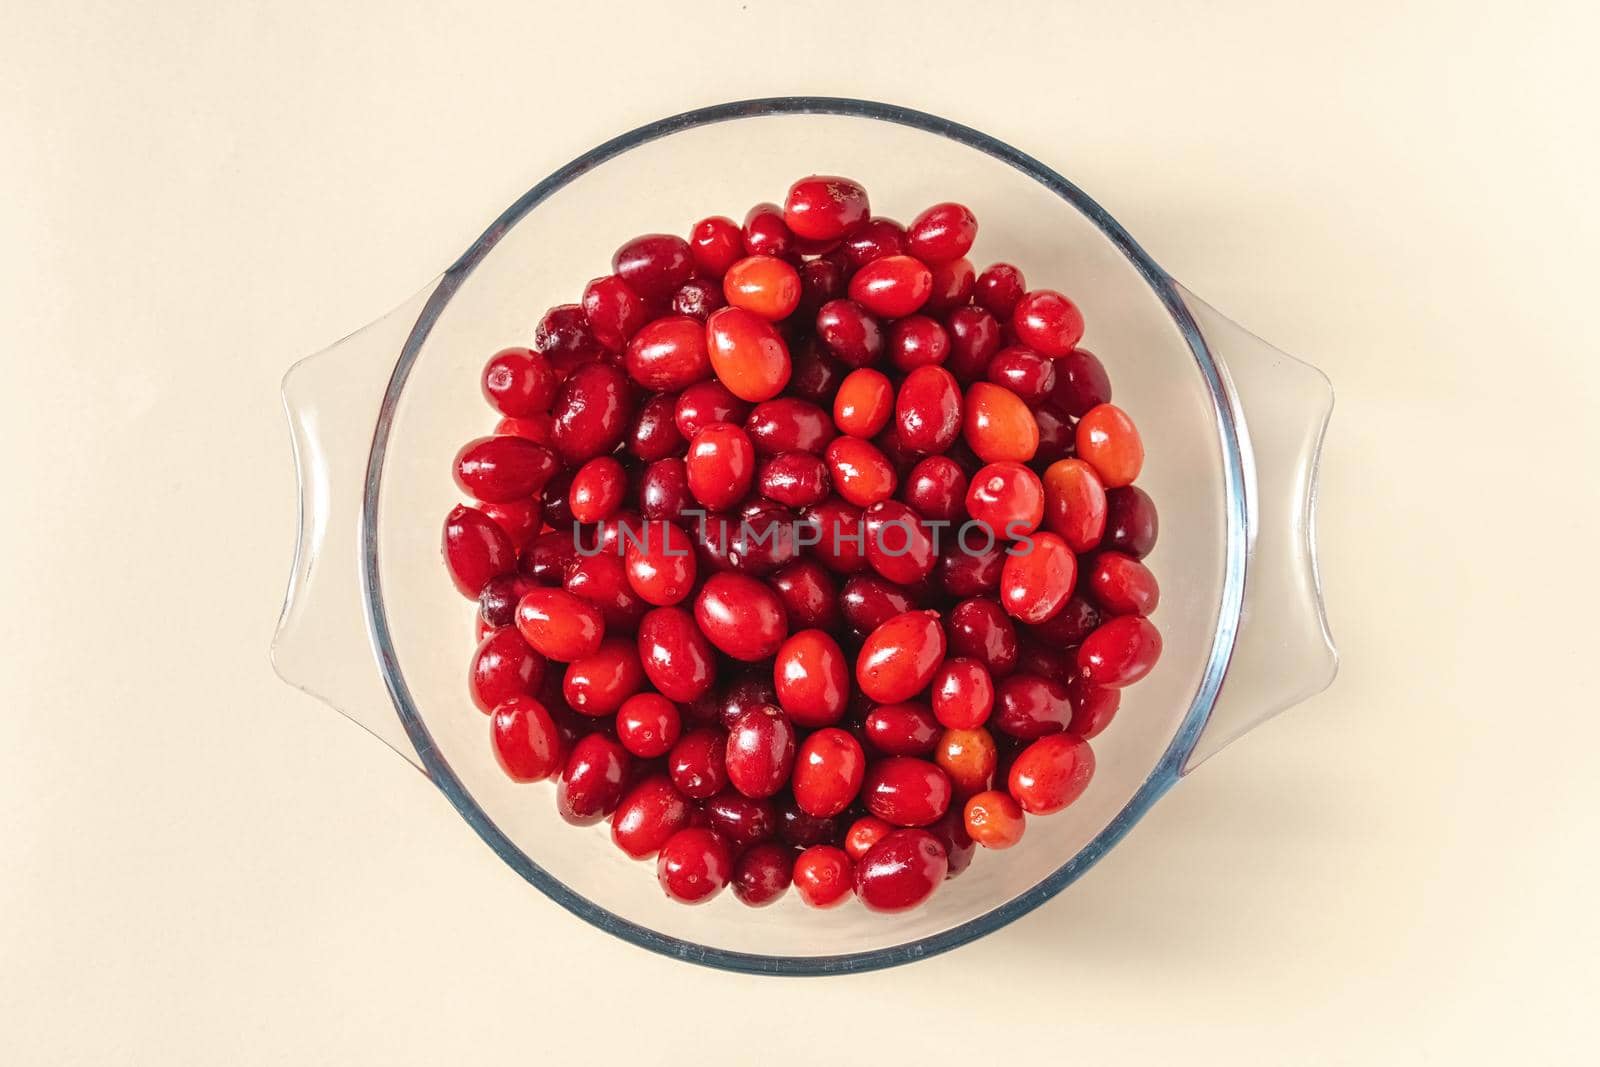 Fresh cranberries in a glass bowl. Healthy eating concept